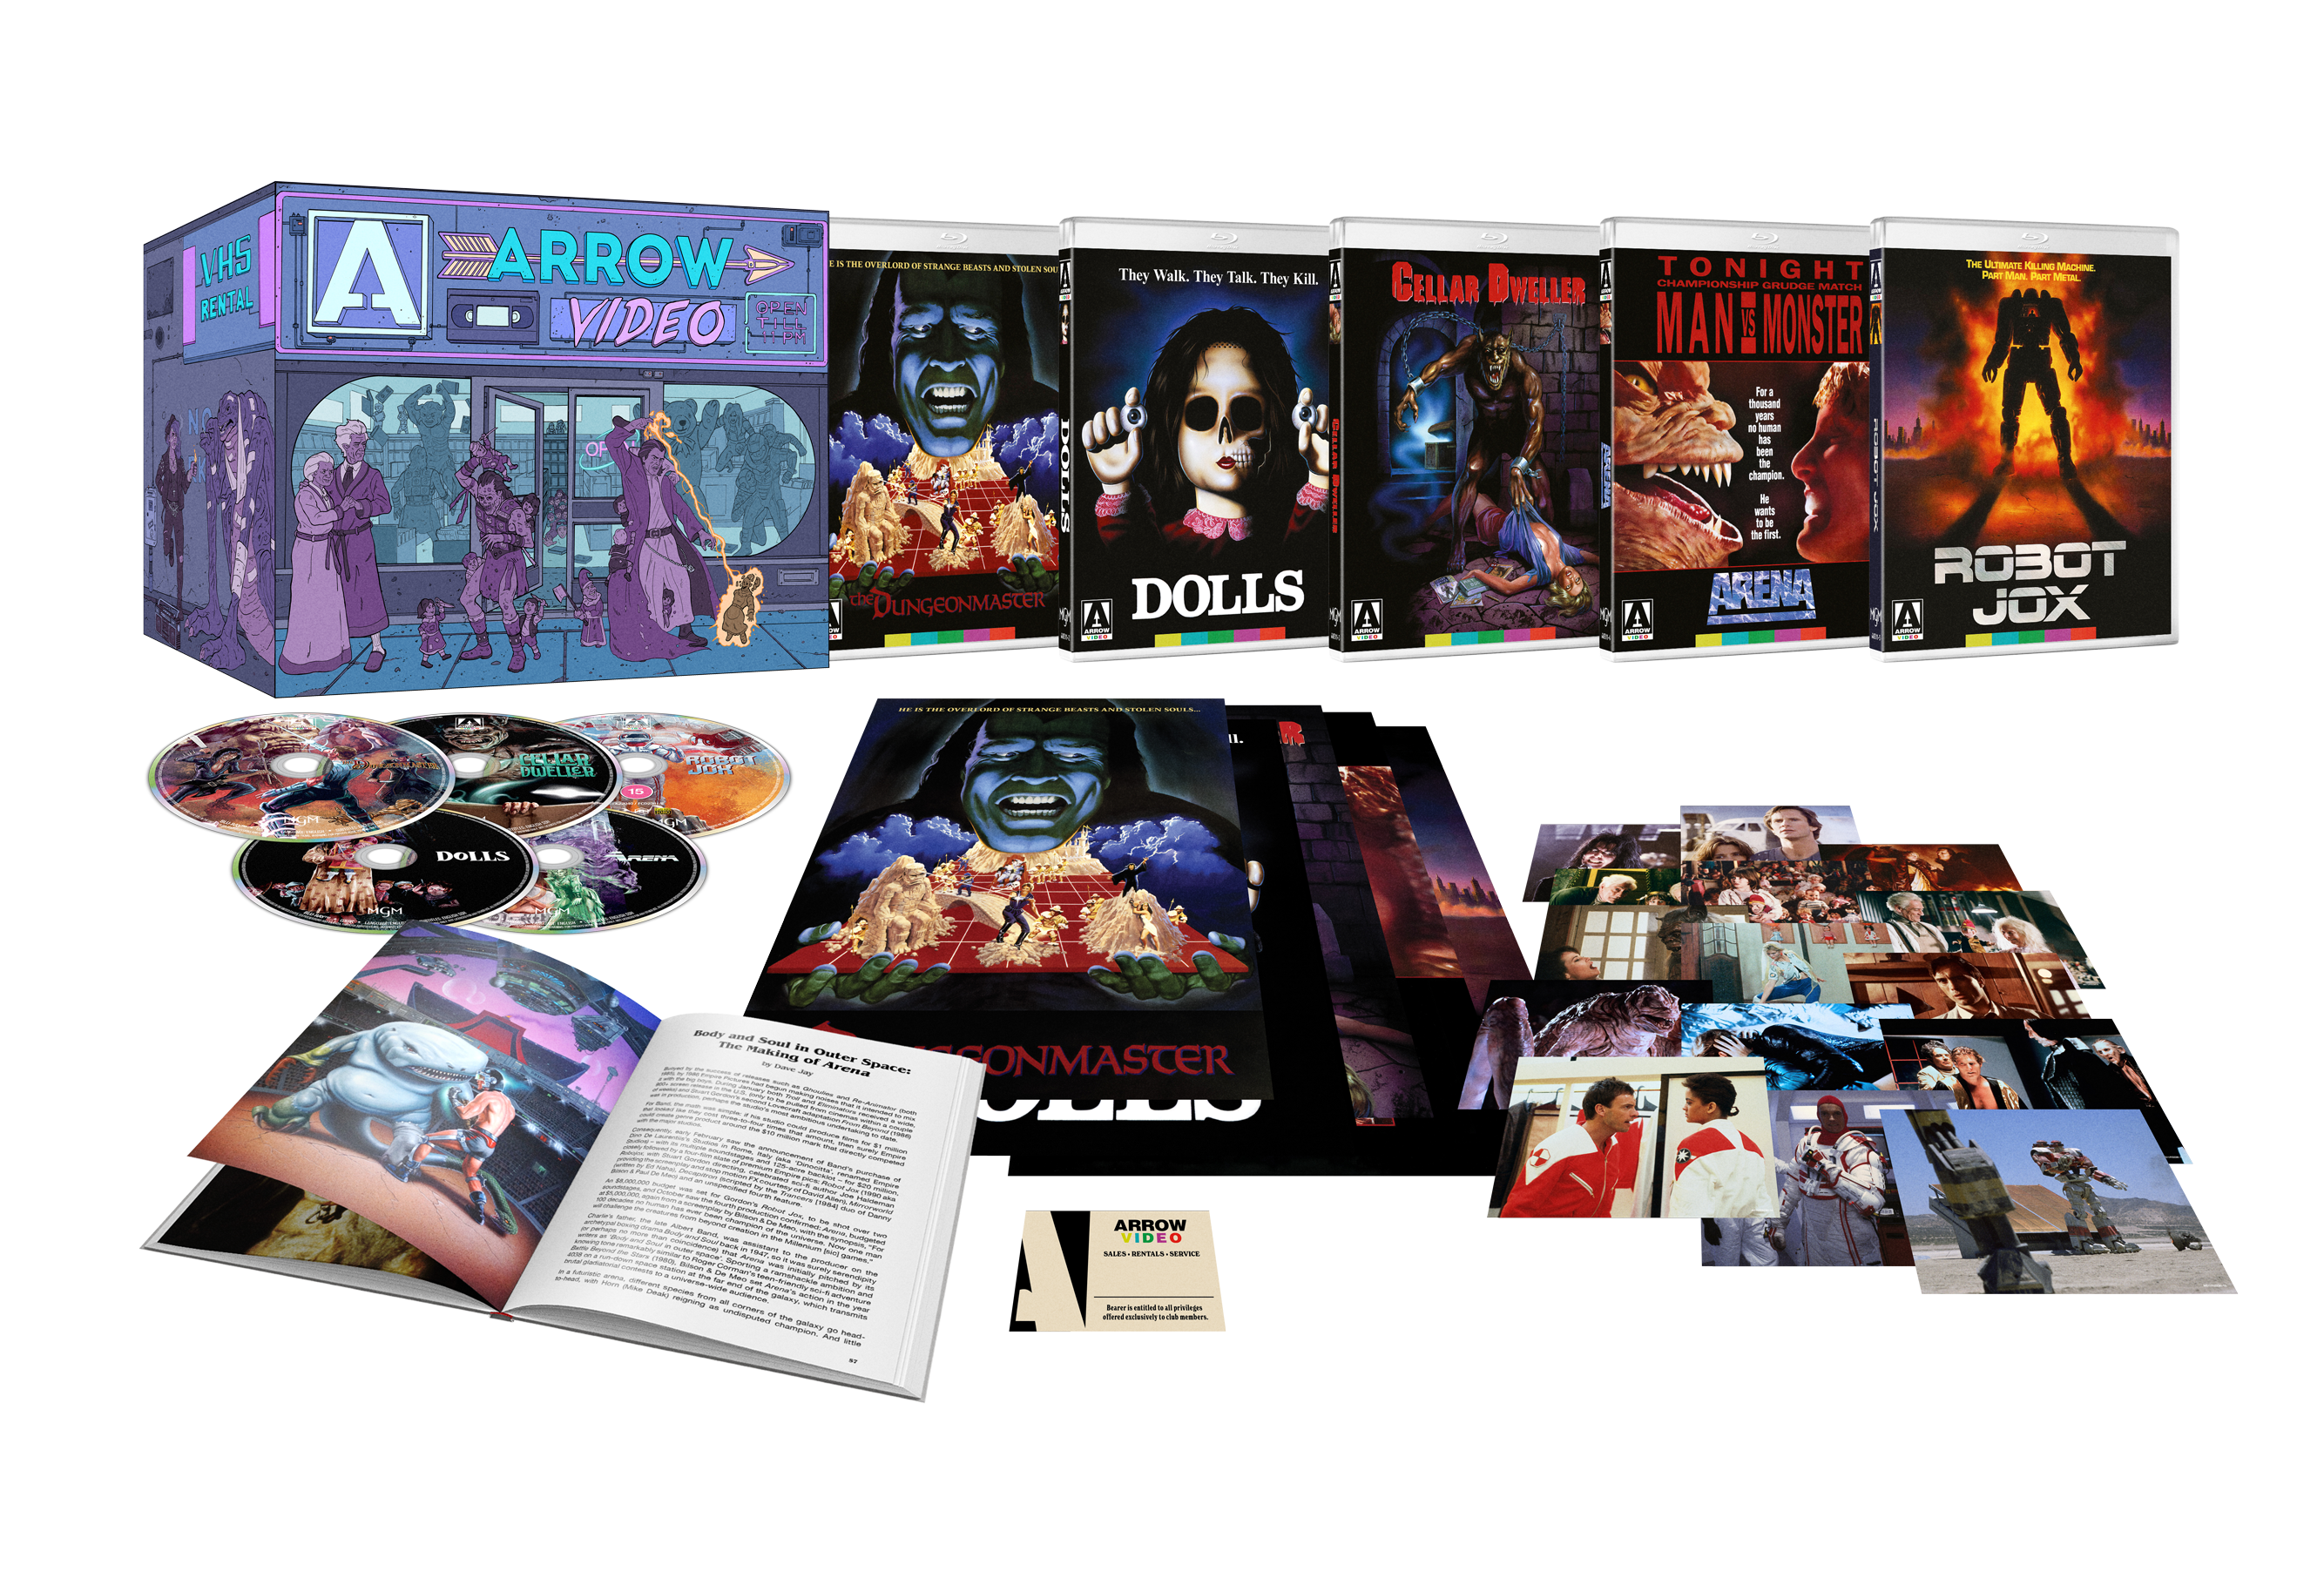 ENTER THE VIDEO STORE: EMPIRE OF SCREAMS (LIMITED EDITION) BLU-RAY [SCRATCH AND DENT]